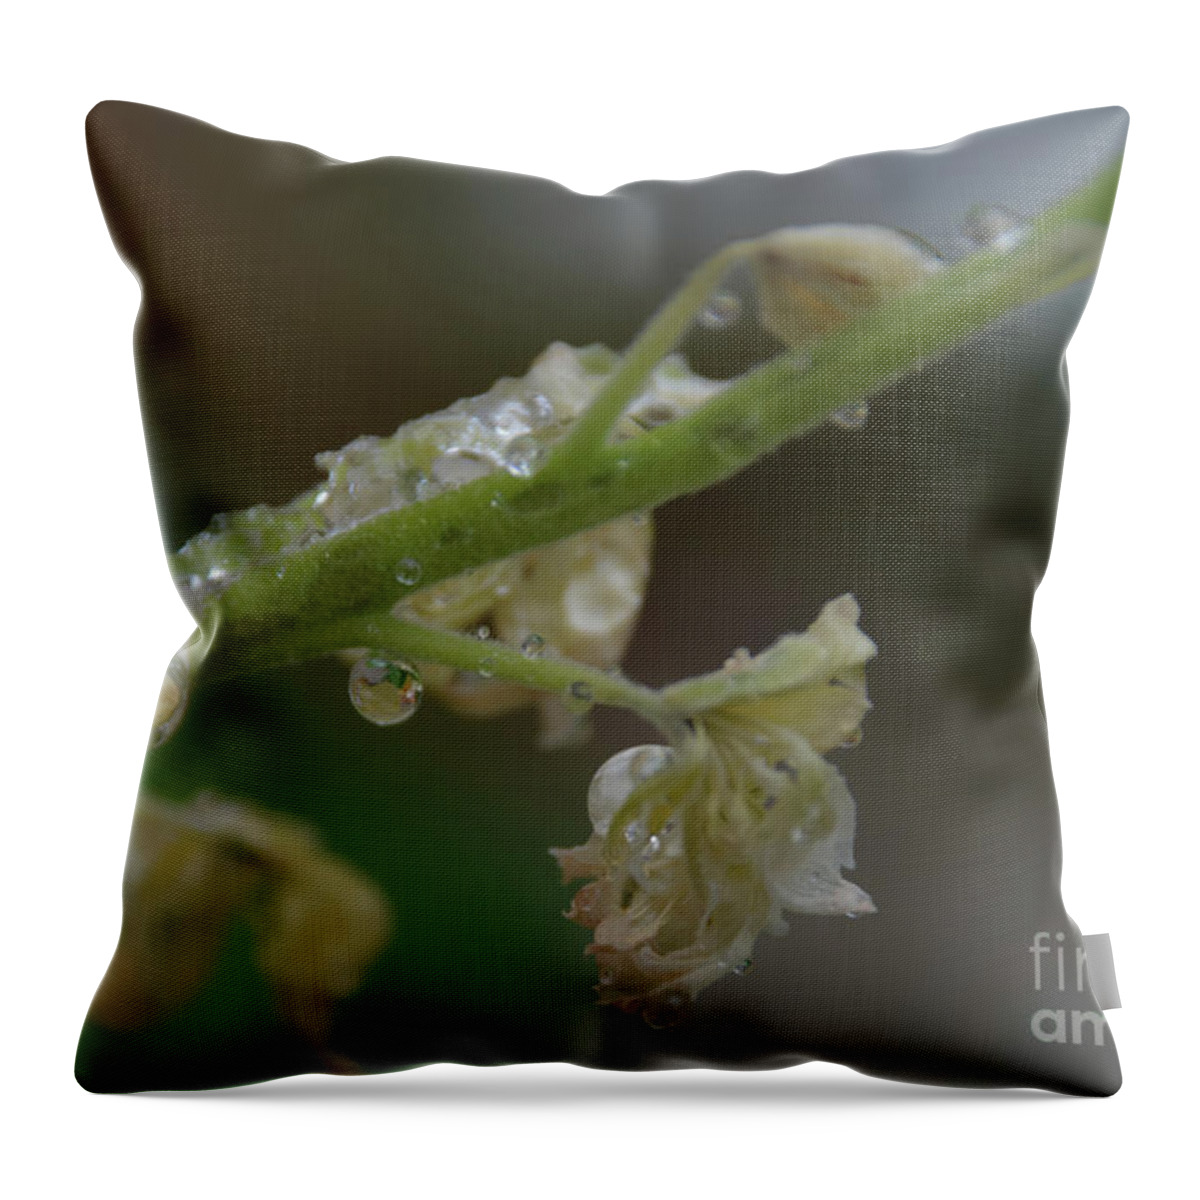 Snow Throw Pillow featuring the photograph Ice Drop Frozen - Georgia by Adrian De Leon Art and Photography